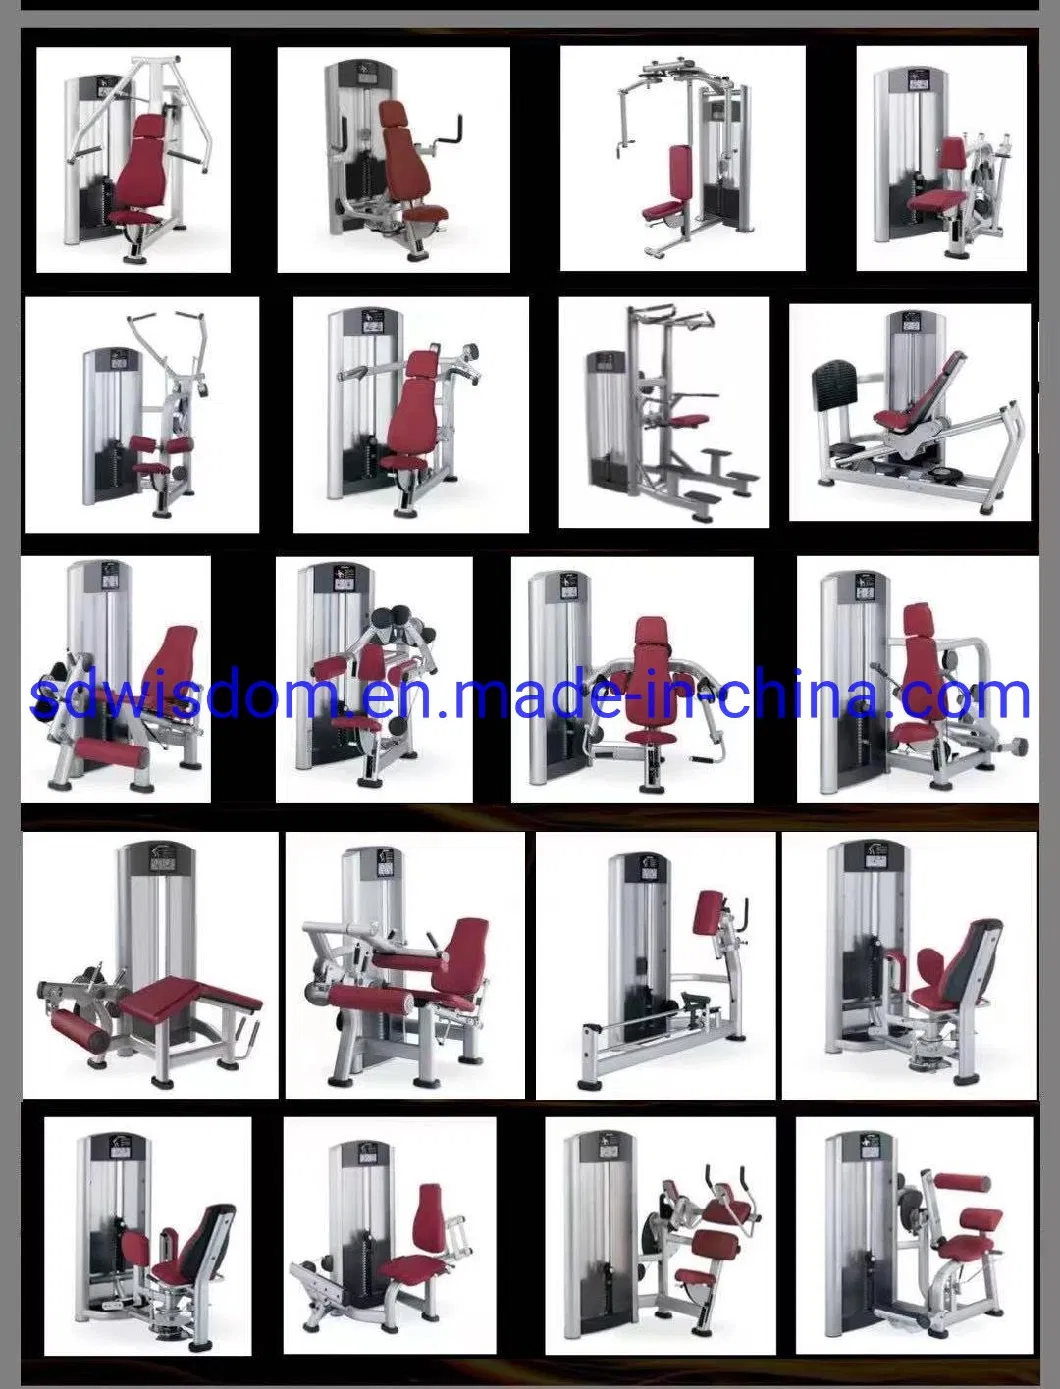 Bodybuilding Commercial Gym Fitness Equipment Standing Calf Raise for Fitness Machine